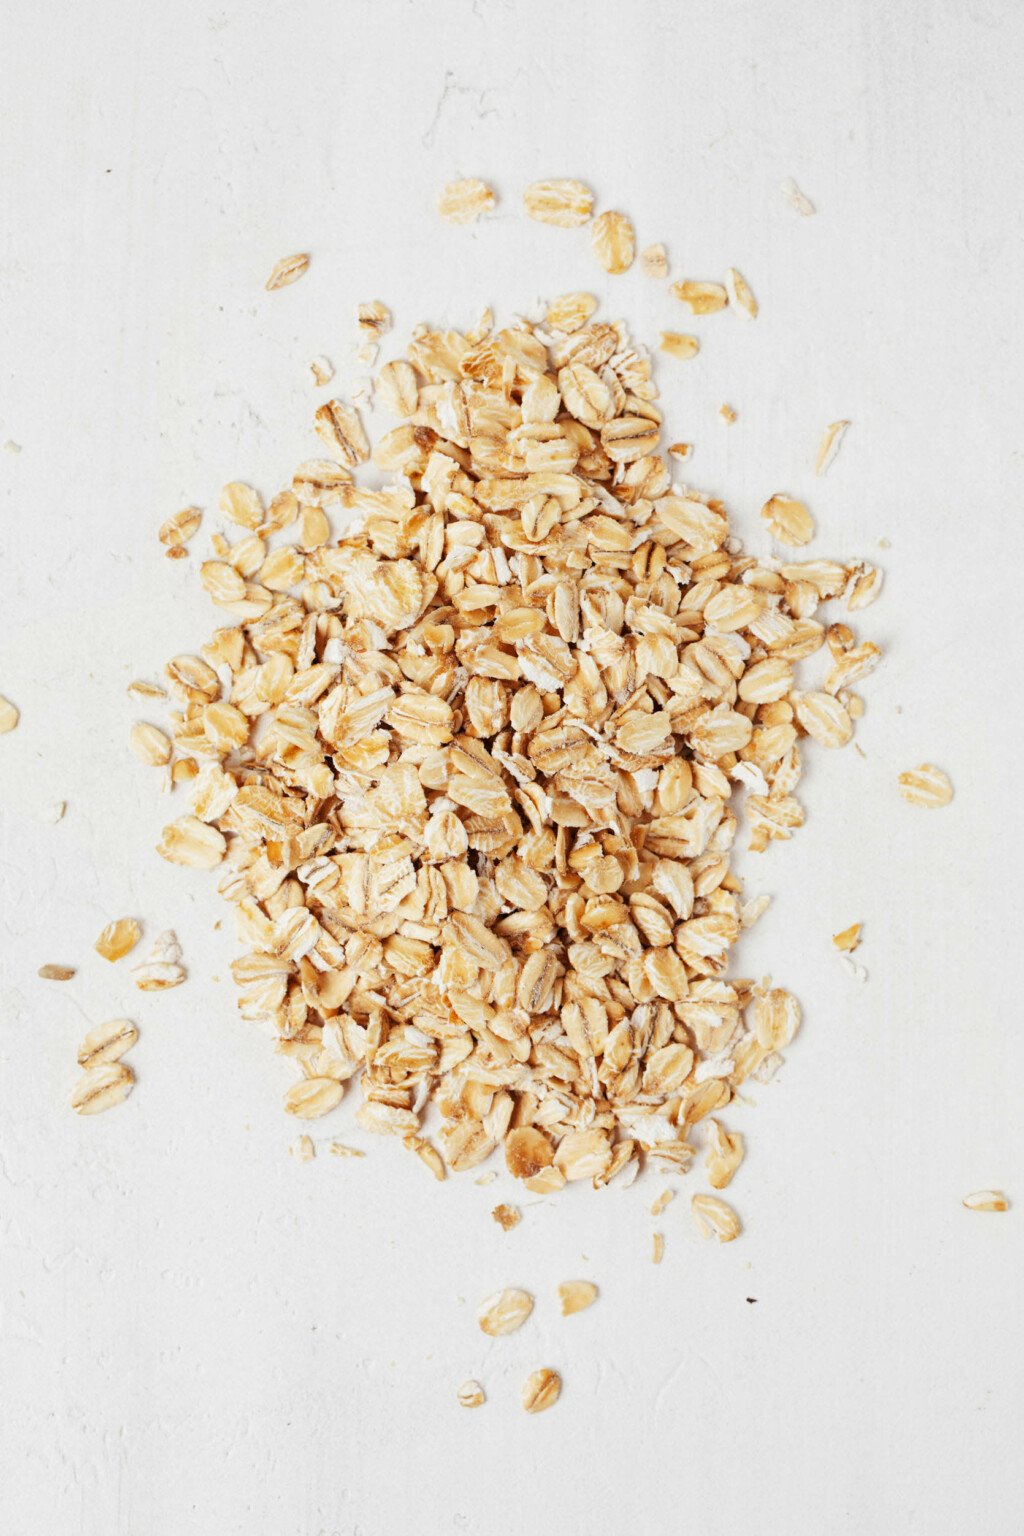 An image of rolled oats, resting on a white surface.